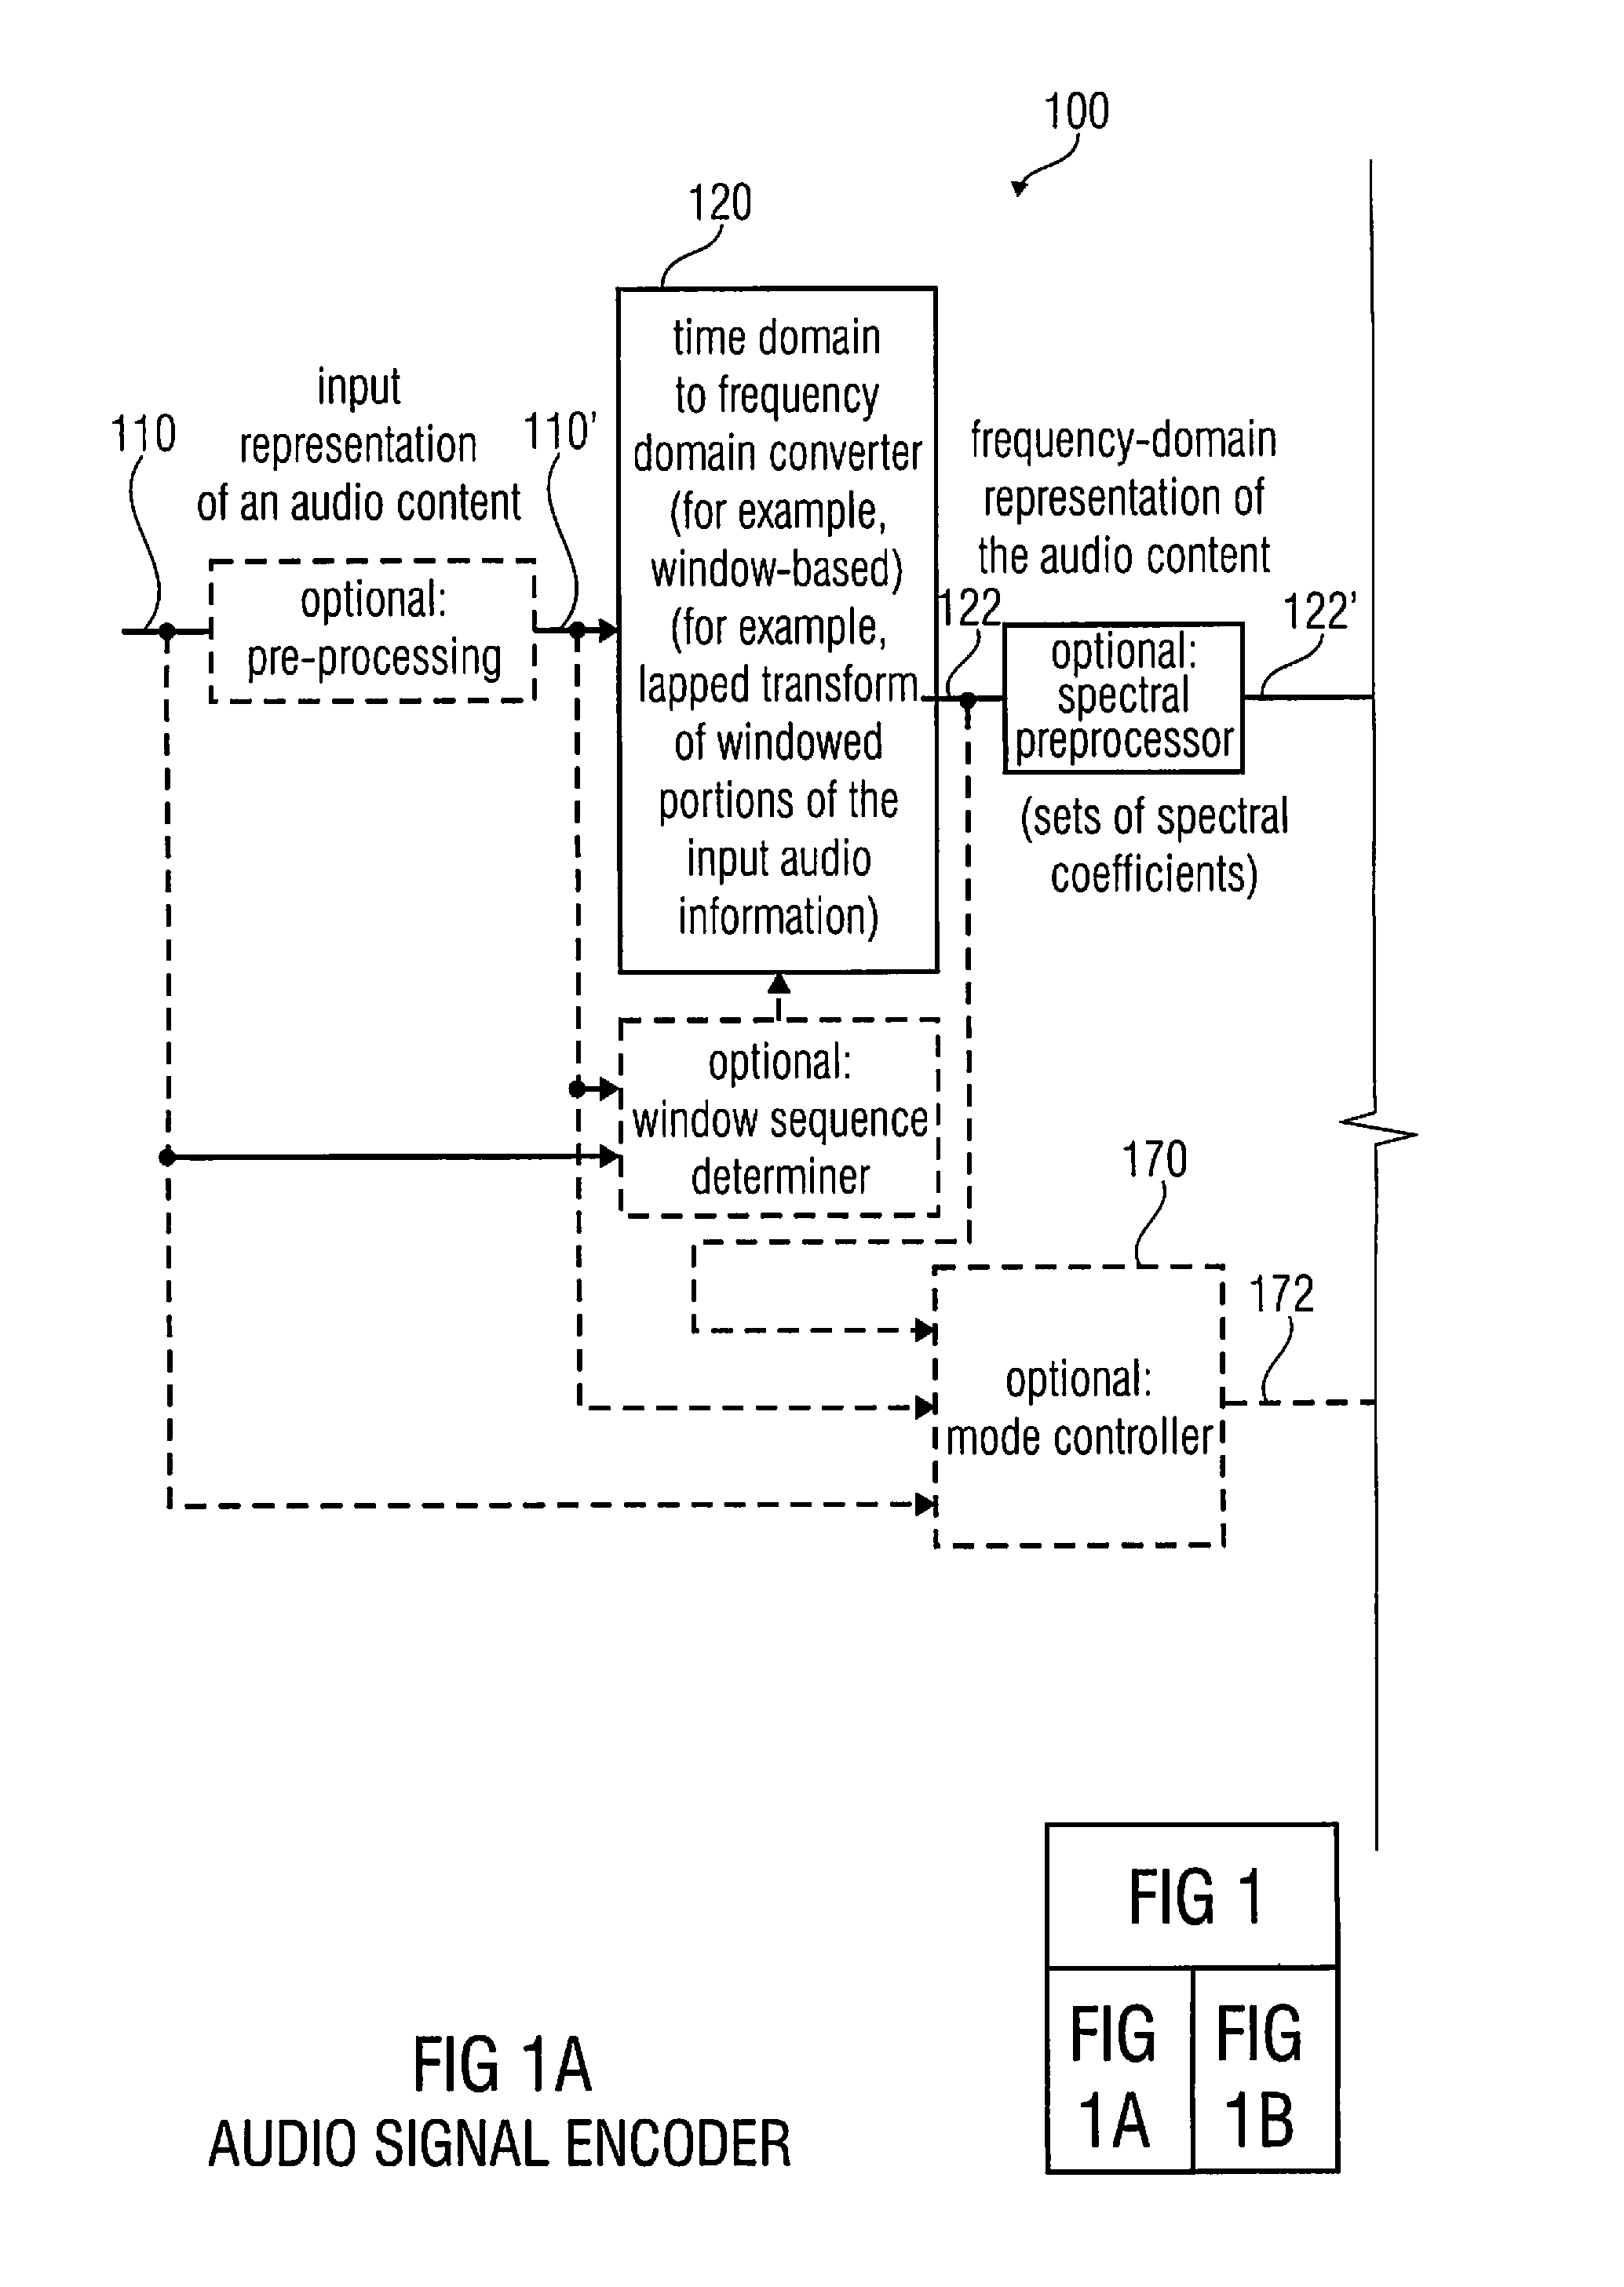 Multi-mode audio encoder and audio decoder with spectral shaping in a linear prediction mode and in a frequency-domain mode